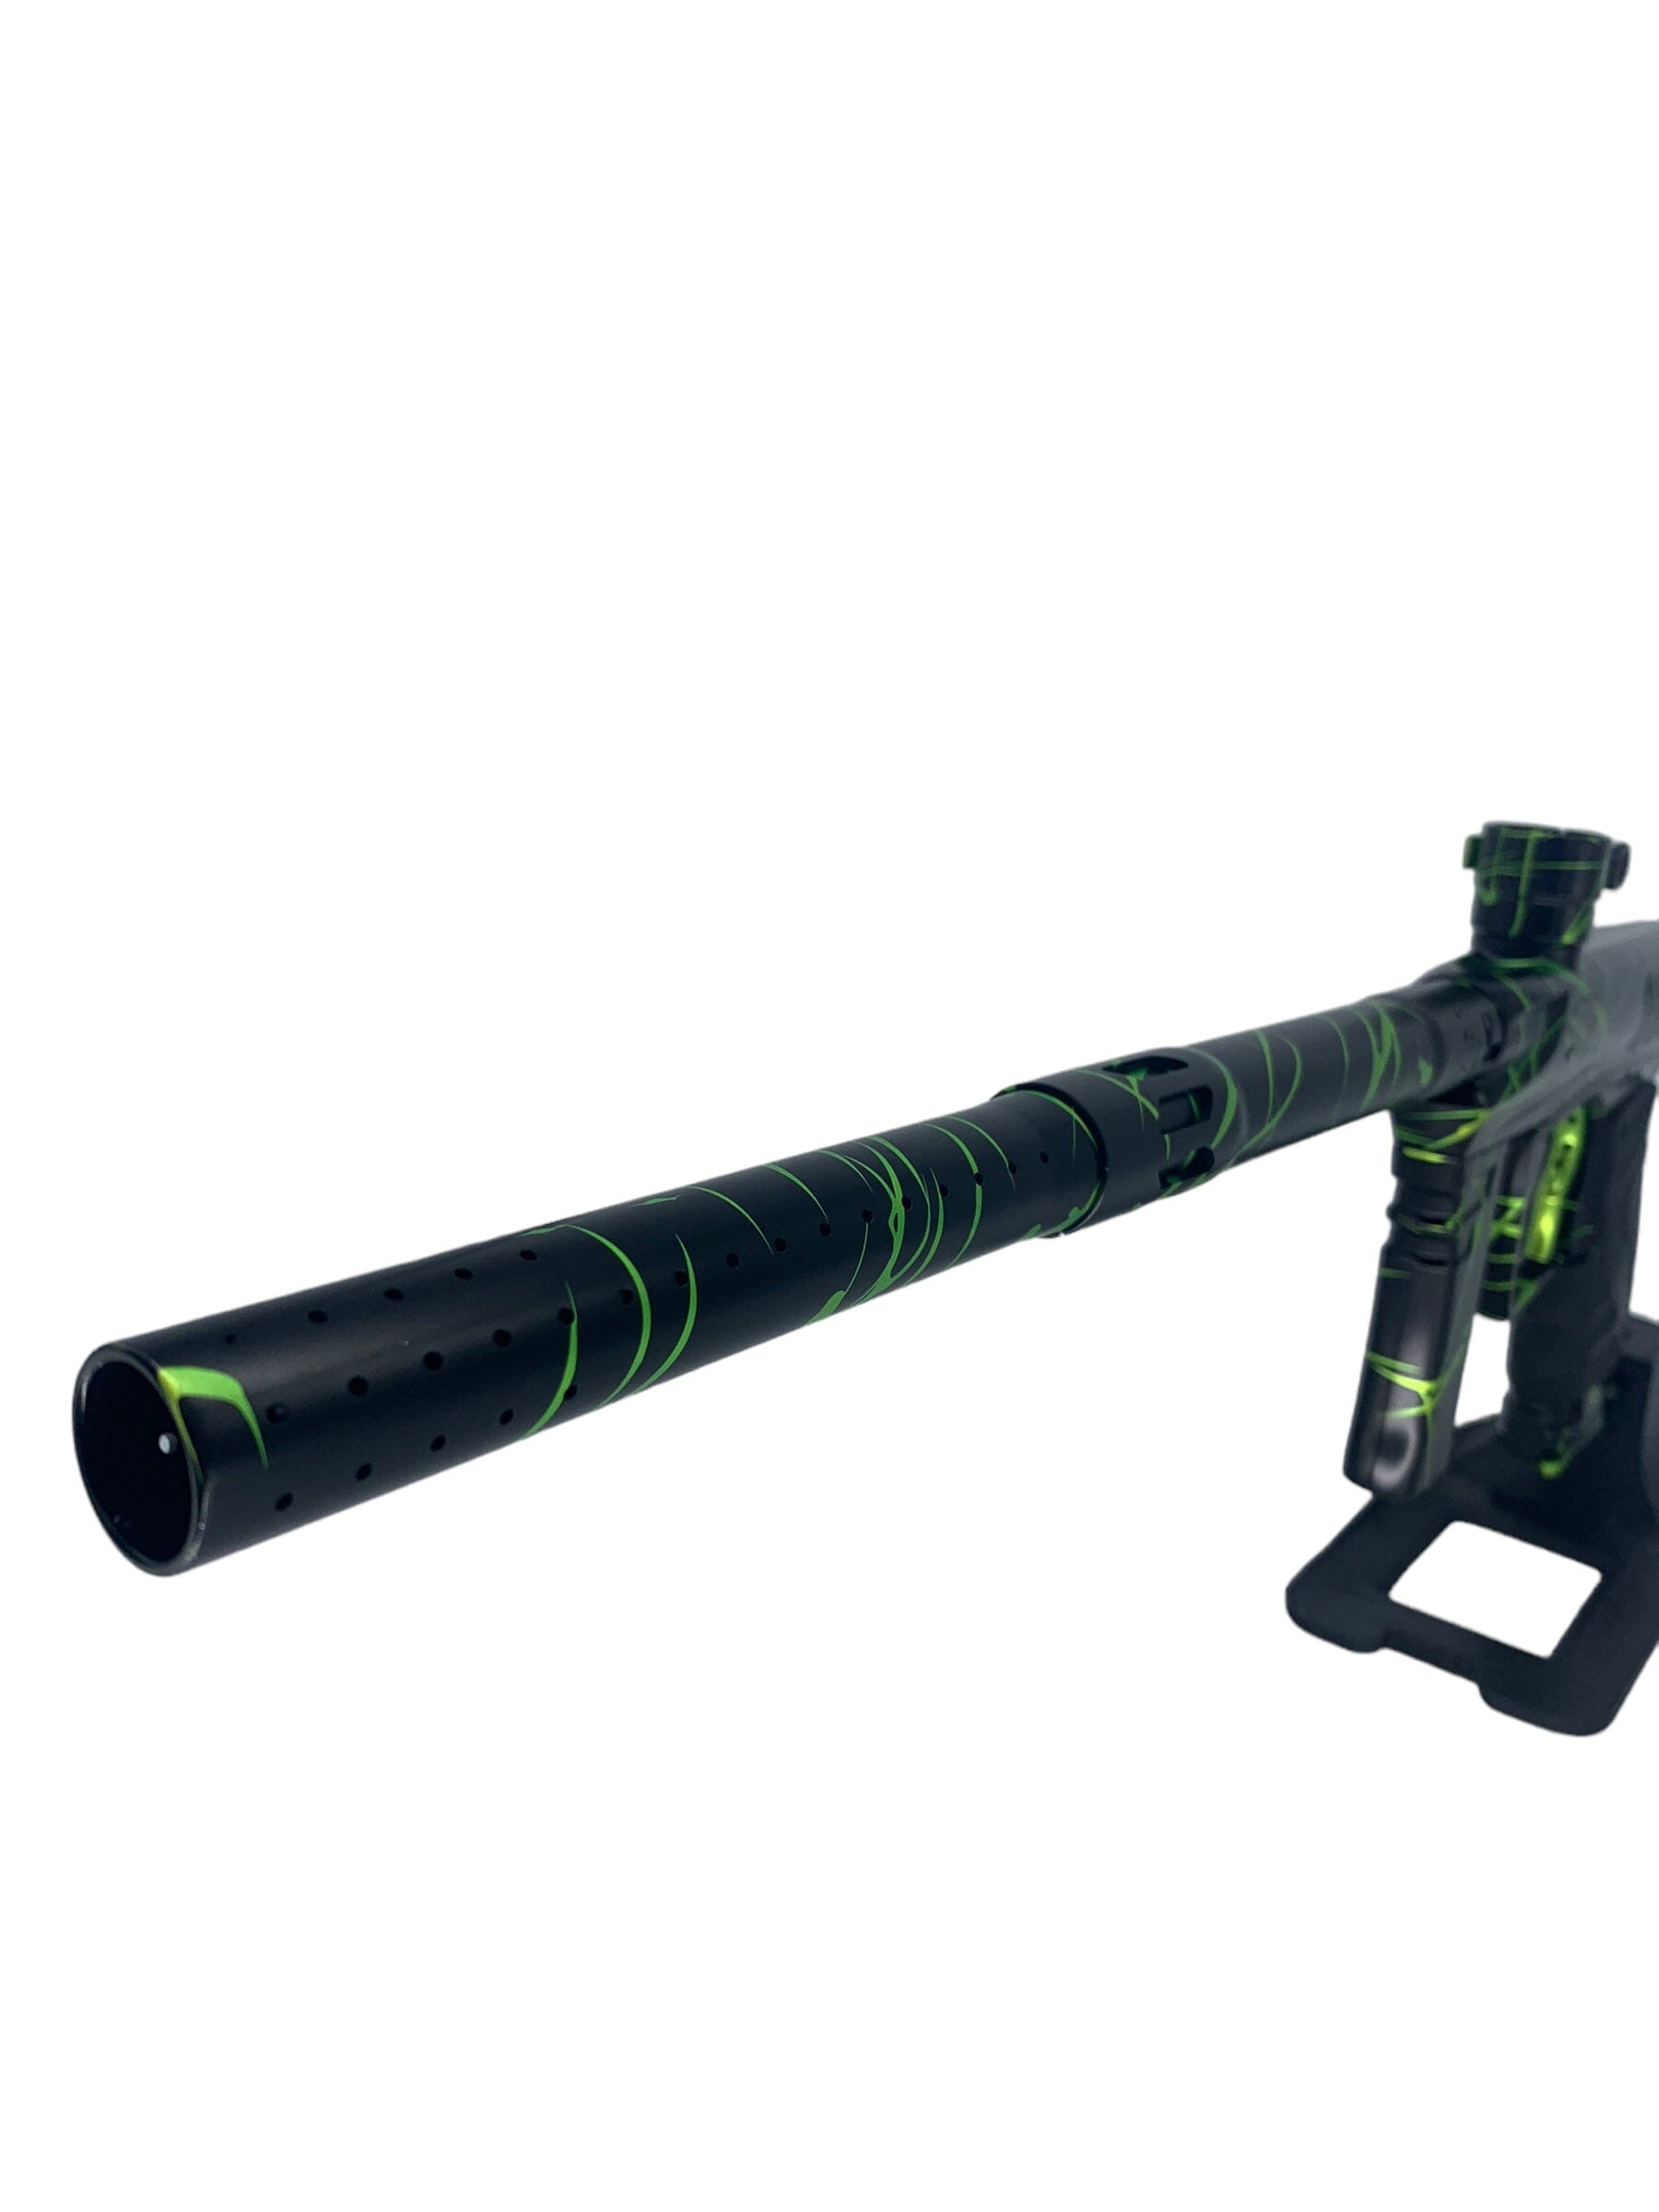 Used Field One Force Paintball Gun Paintball Gun from CPXBrosPaintball Buy/Sell/Trade Paintball Markers, New Paintball Guns, Paintball Hoppers, Paintball Masks, and Hormesis Headbands